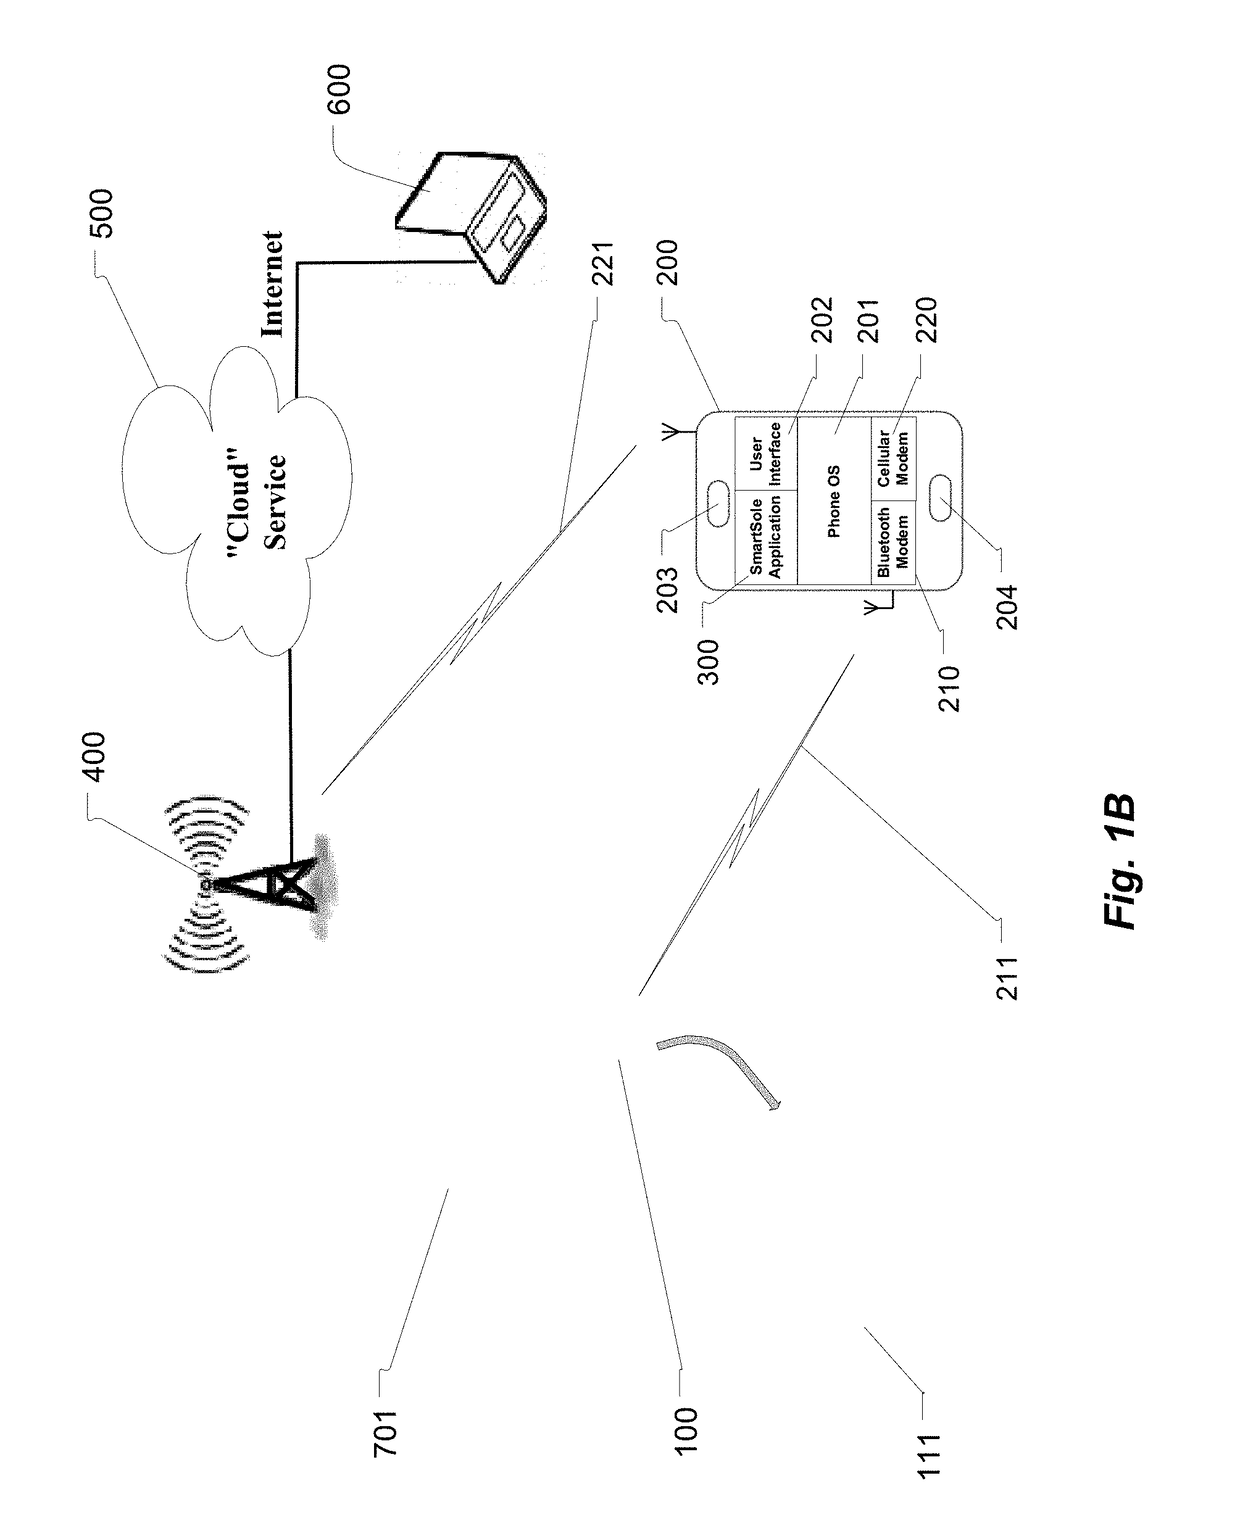 Method and Apparatus for Analysis of Gait and to Provide Haptic and Visual Corrective Feedback